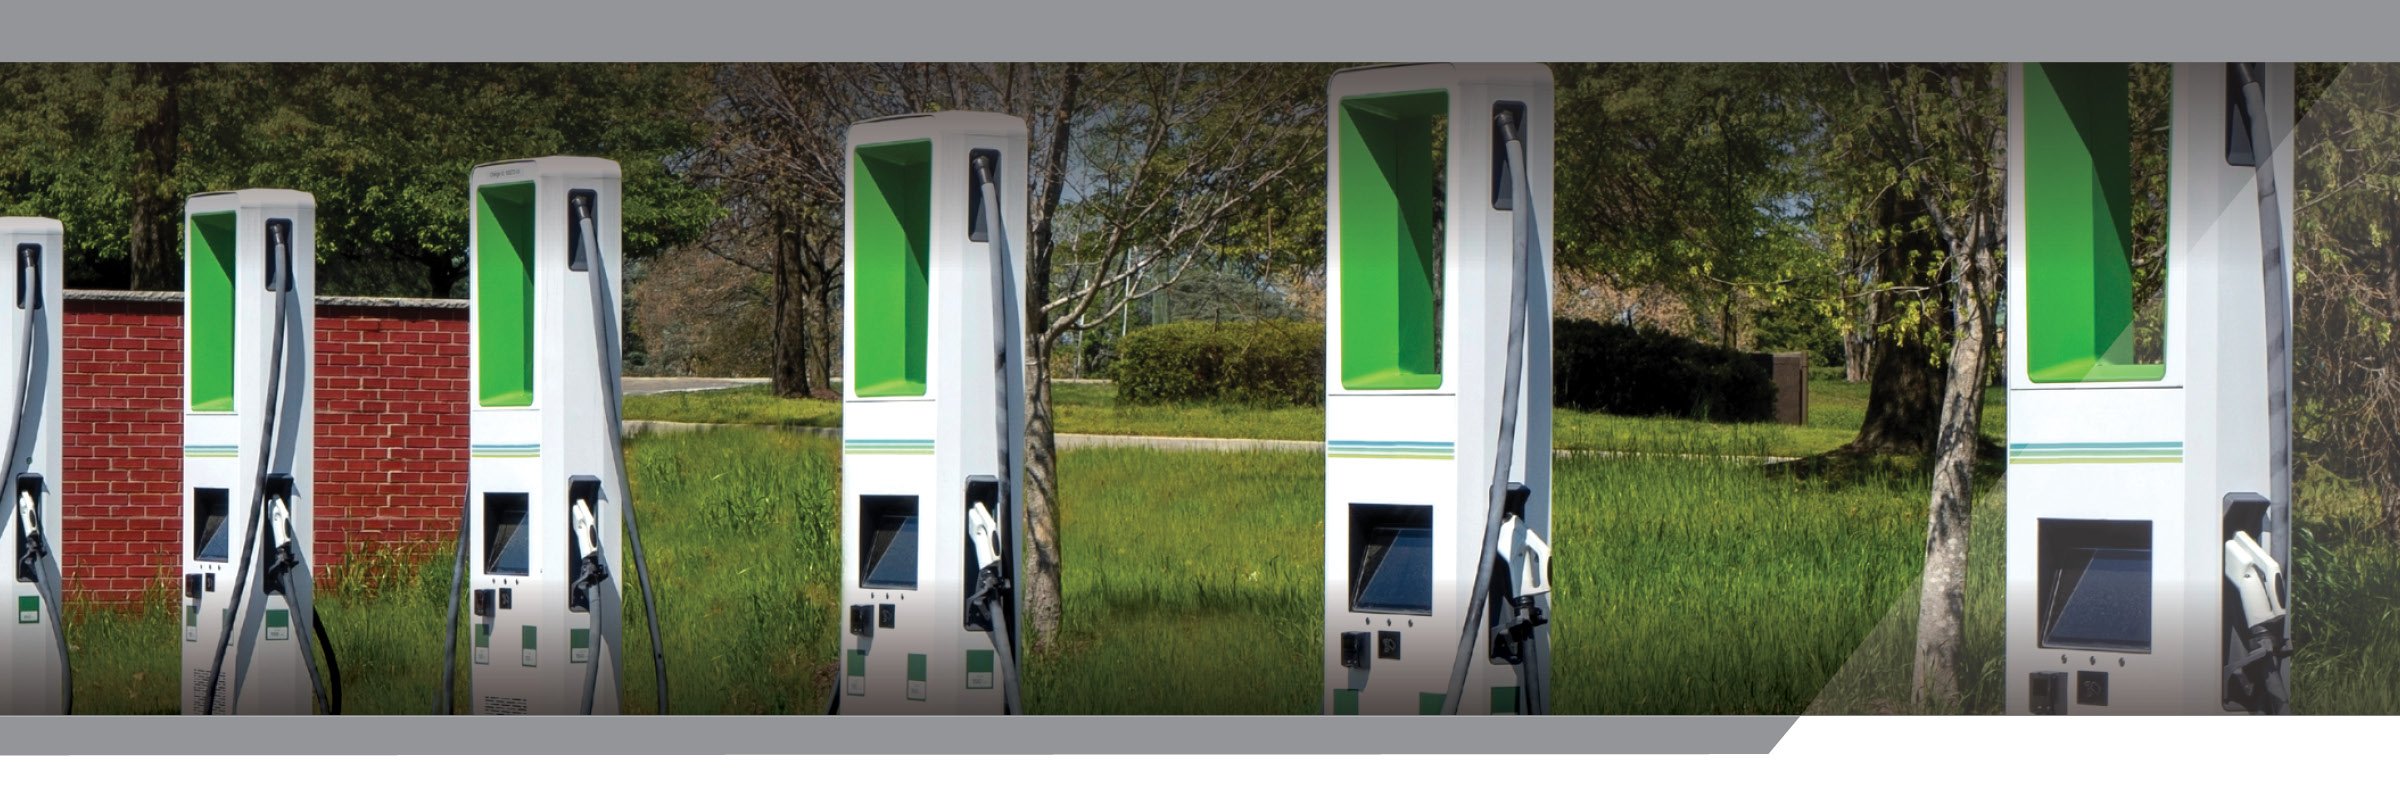 Line of electric vehicle charging stations